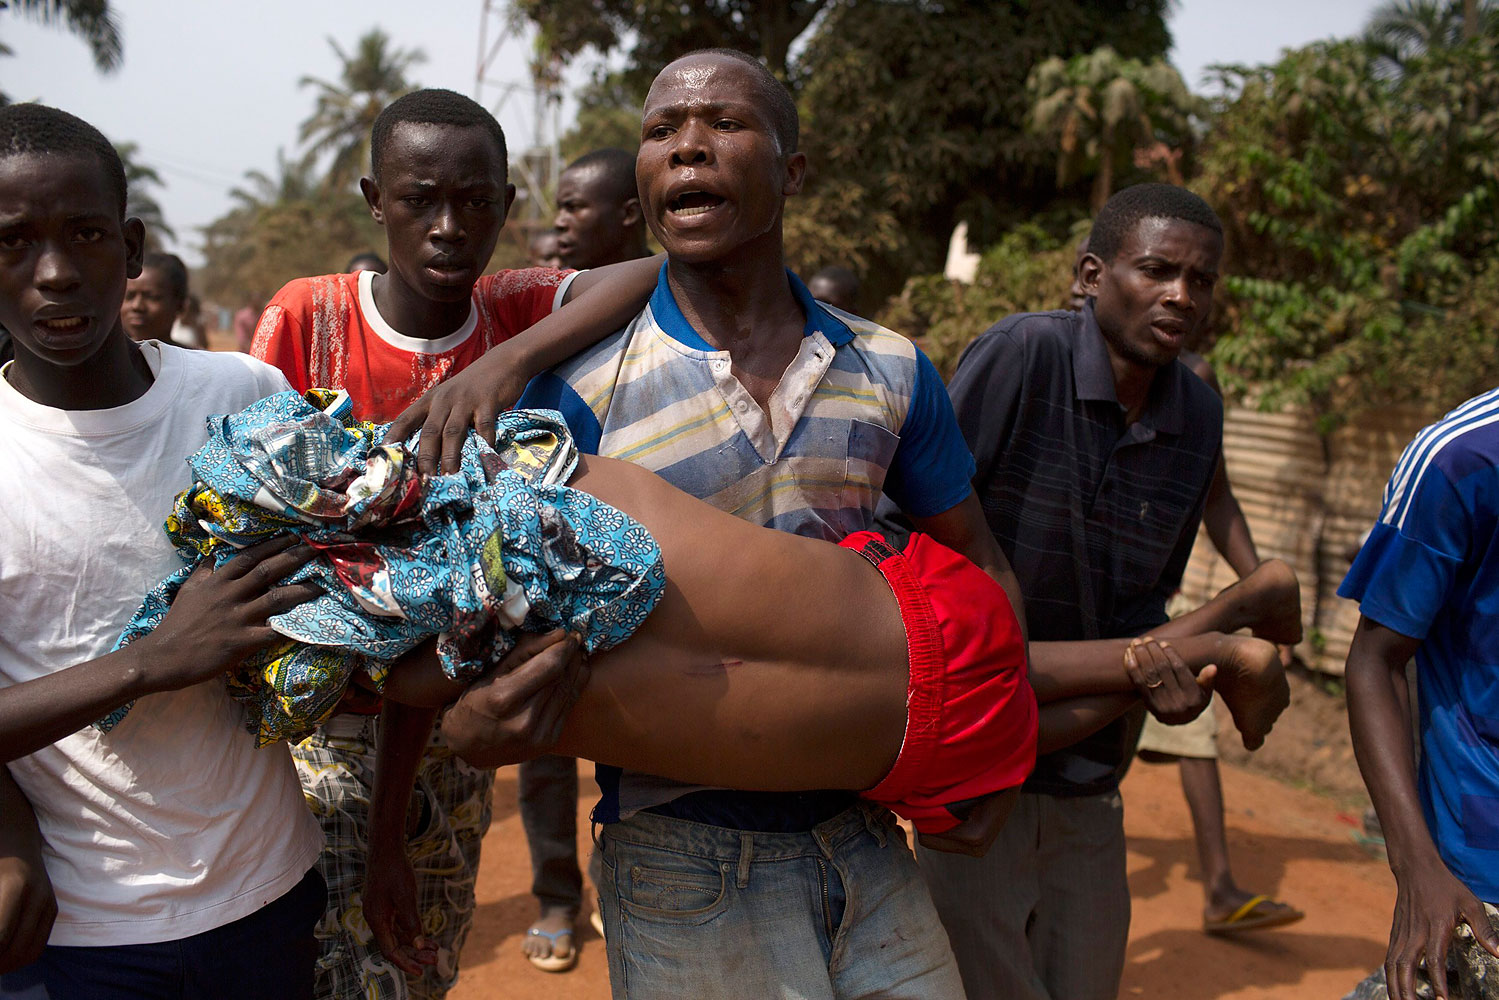 Men carry a boy, who died shortly after from a gunshot wound during a violent confrontation between Muslims and Christians, in Miskine district in the capital Bangui, Jan. 24, 2014.